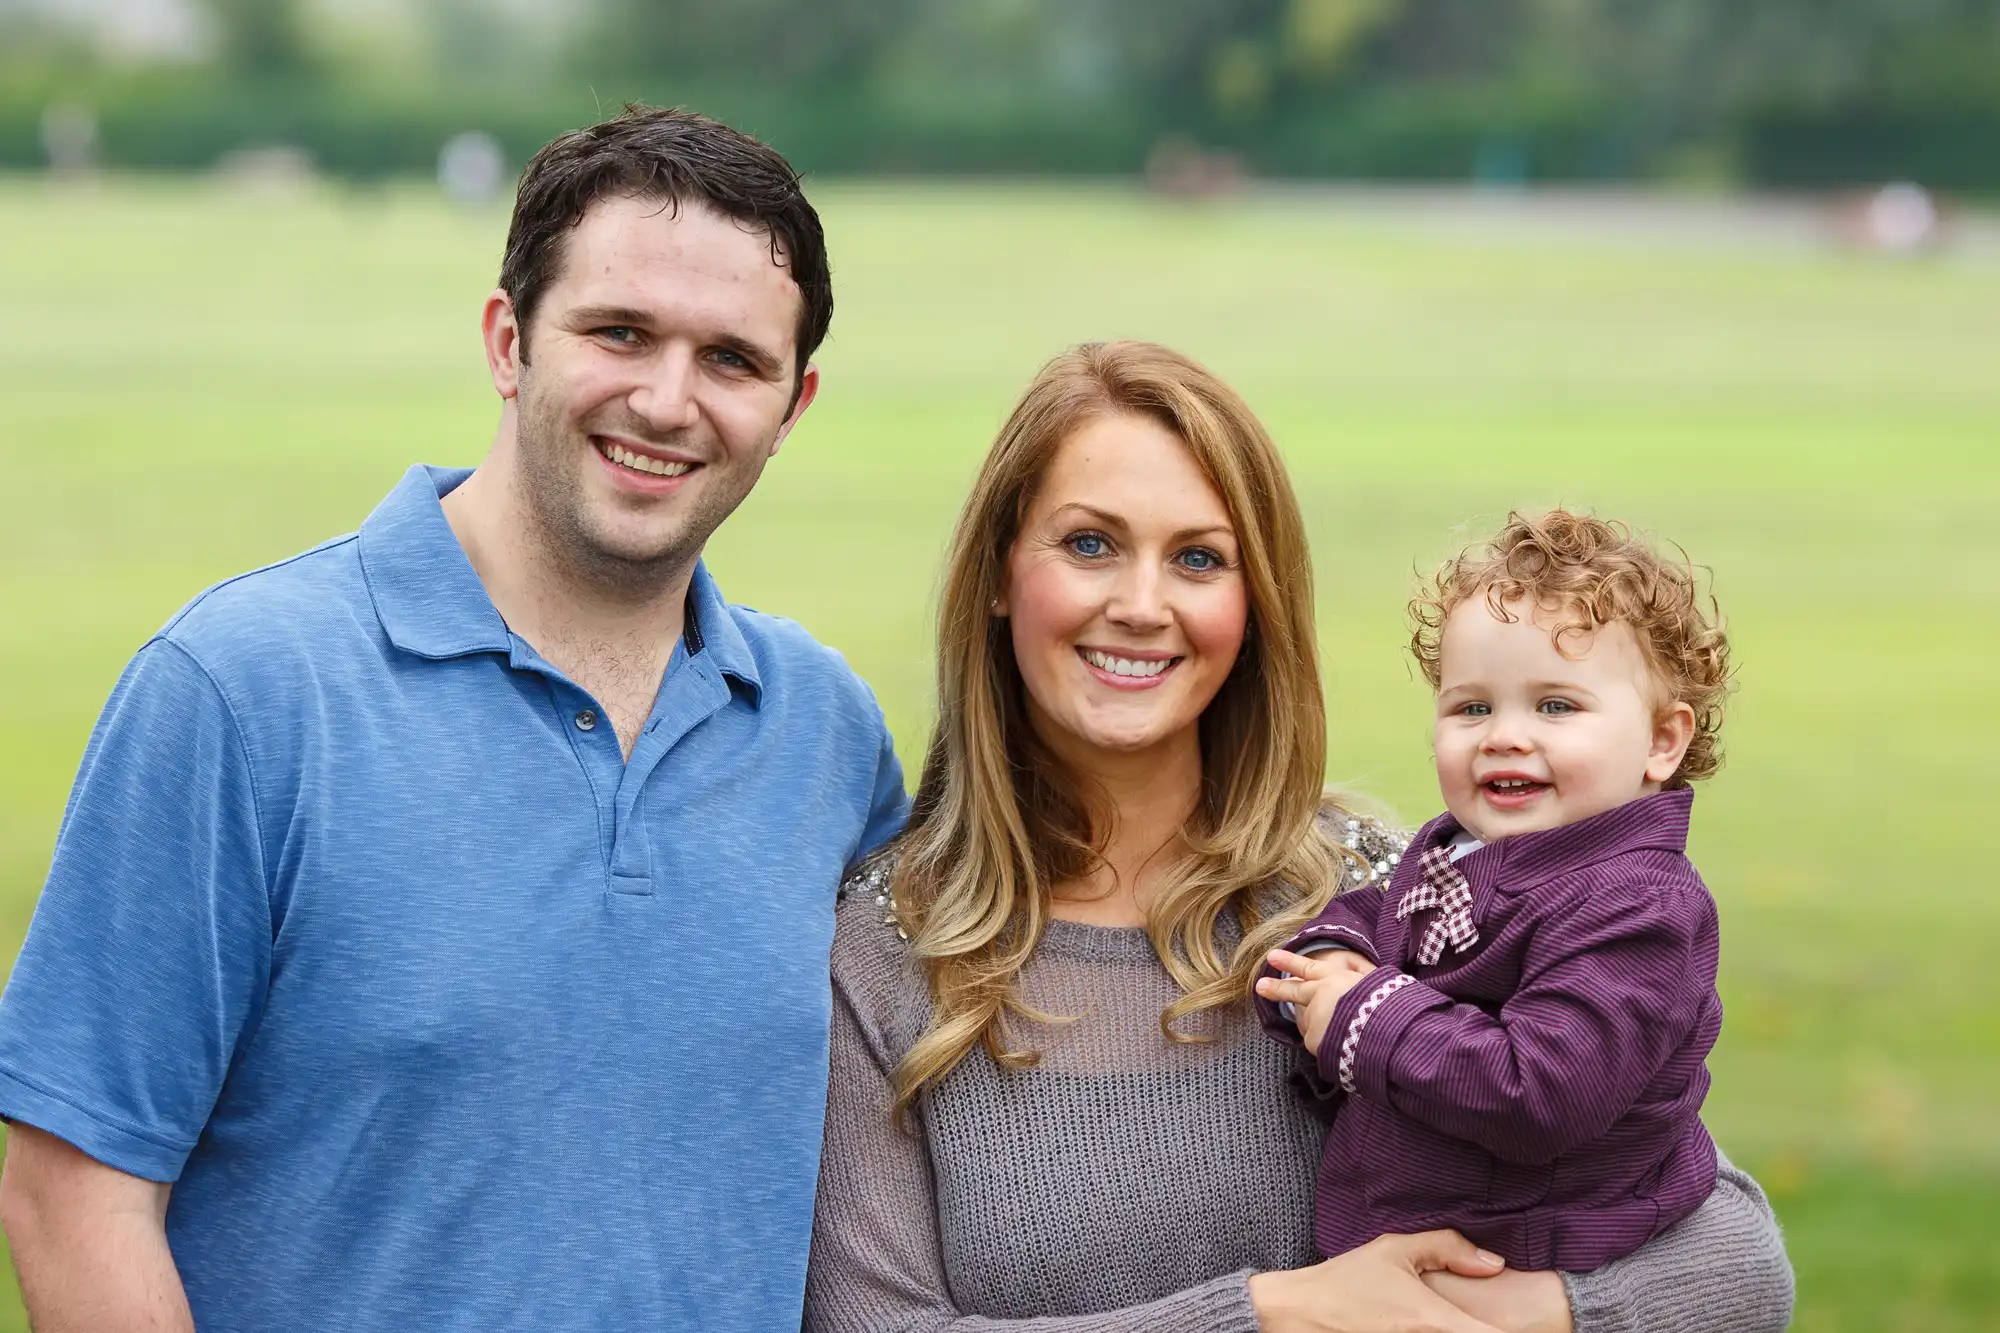 A family of three smiling outdoors; a man in a blue polo, a woman with blonde hair in gray, and a toddler with curly hair in purple.